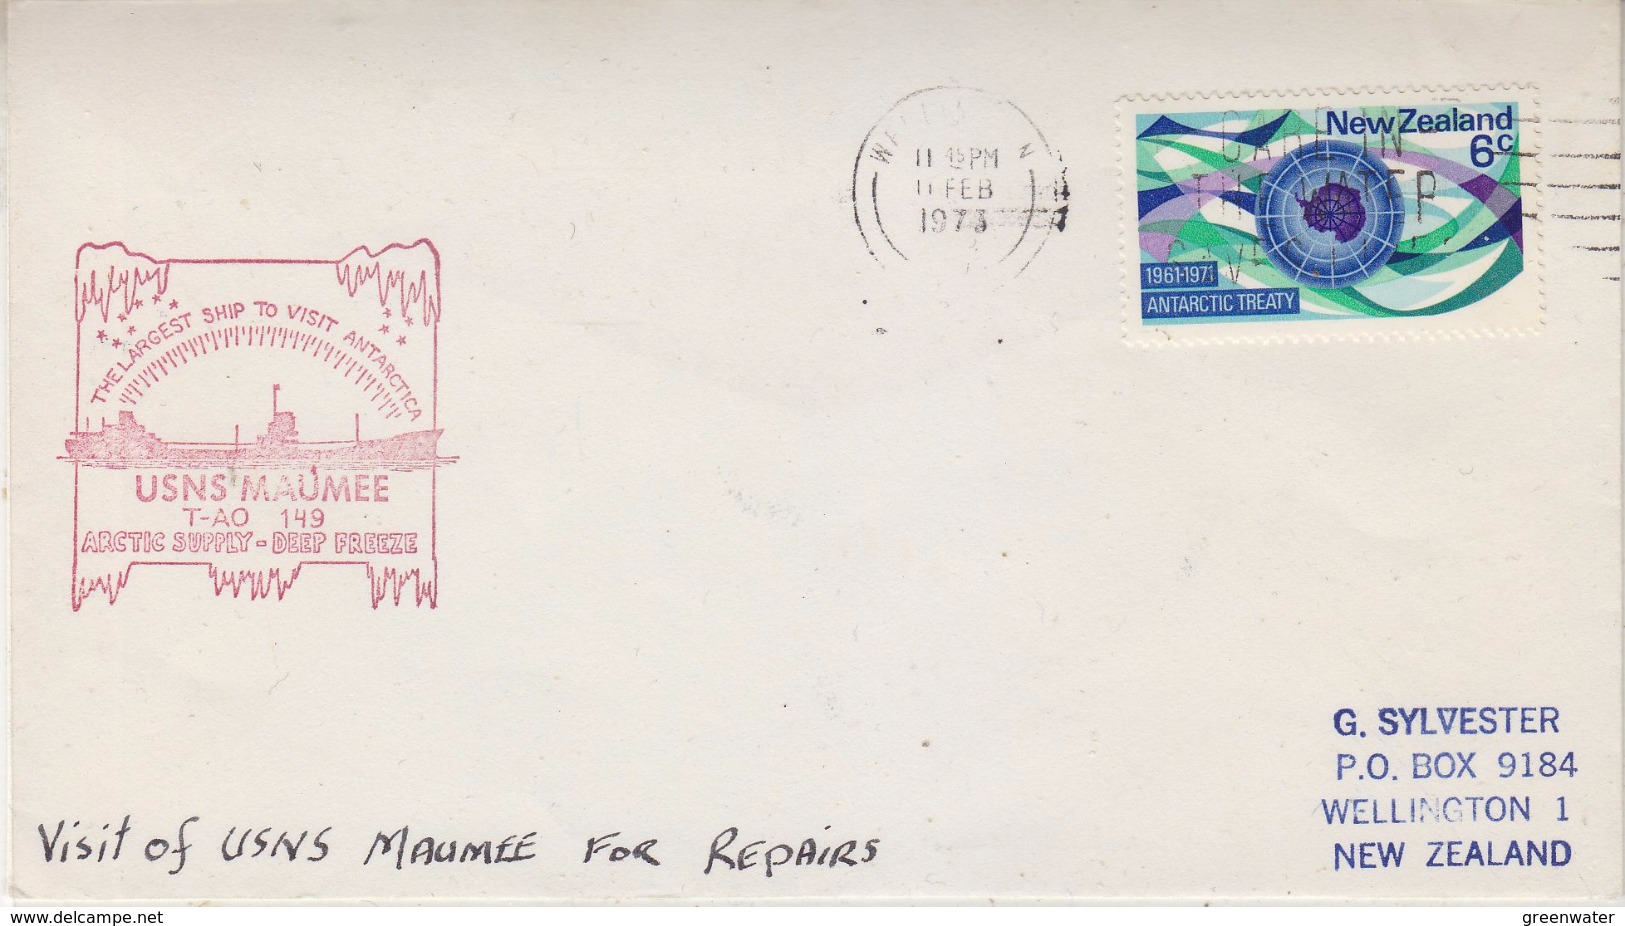 New Zealand 1973 USNS Maumee The Largest Ship To Visit Antarctica Ca Wellington 11 Feb 1973 Cover (34844) - Navires & Brise-glace